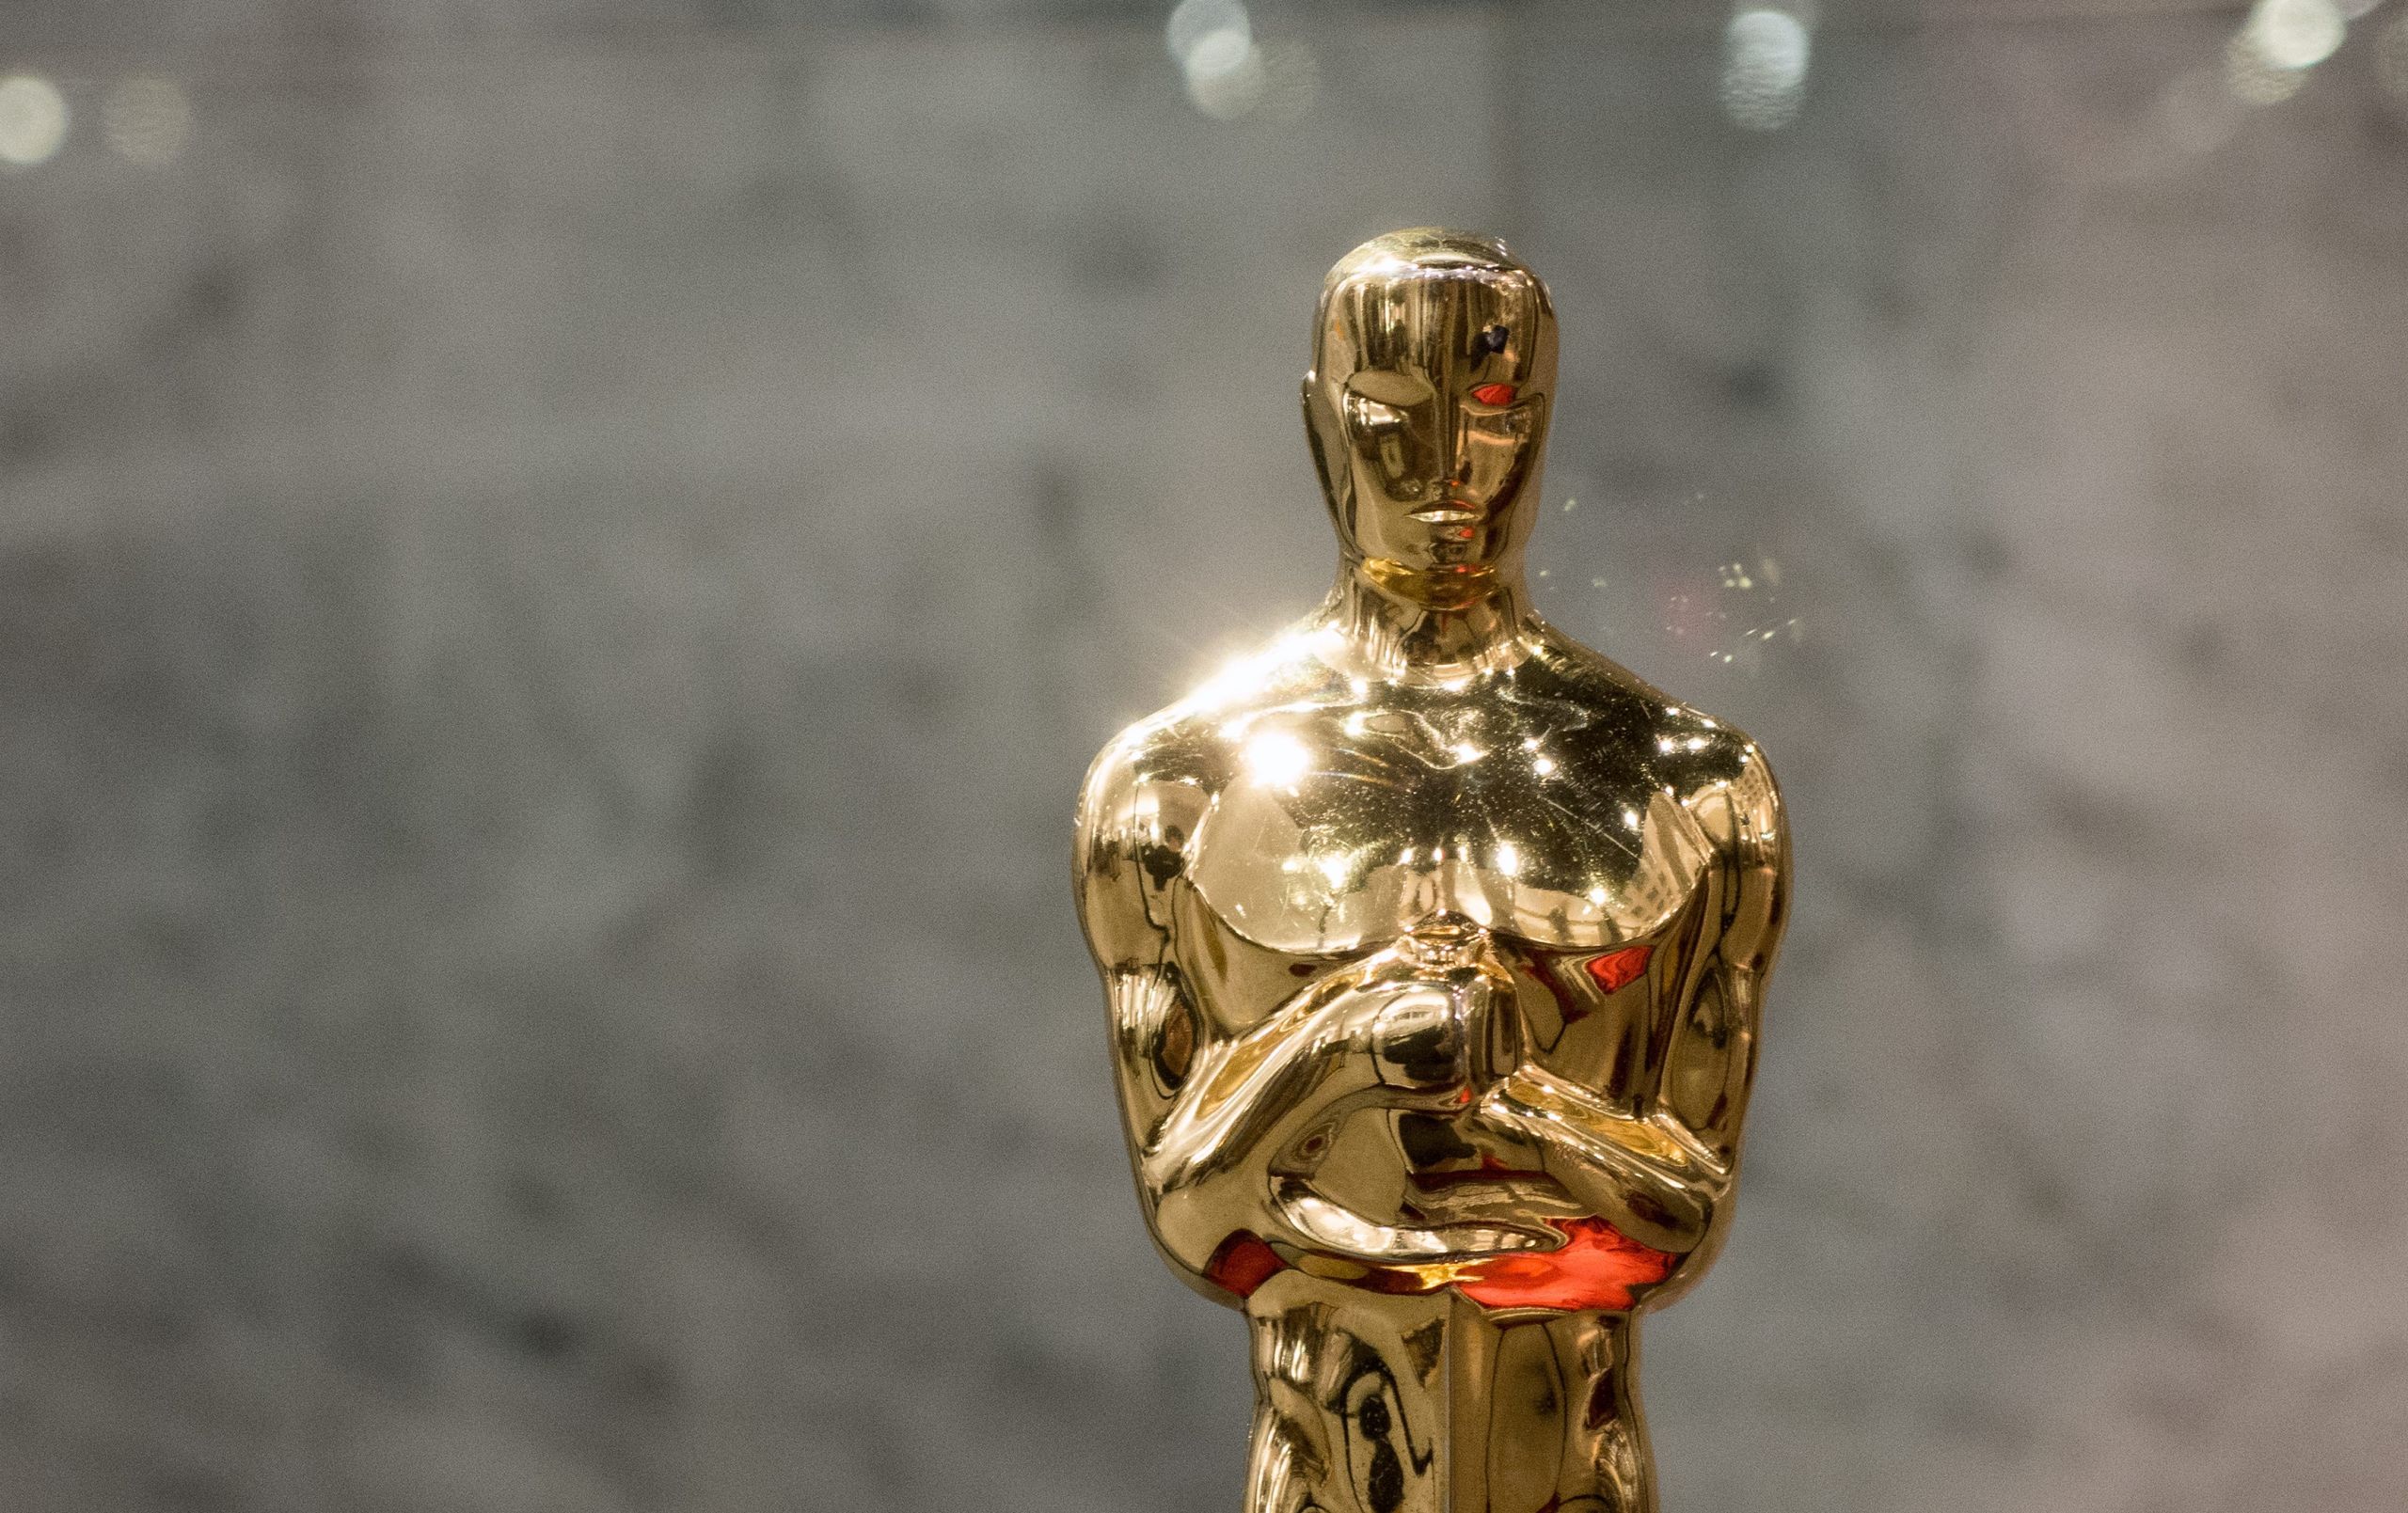 A close-up shot of the Oscar for Closely Watched Trains